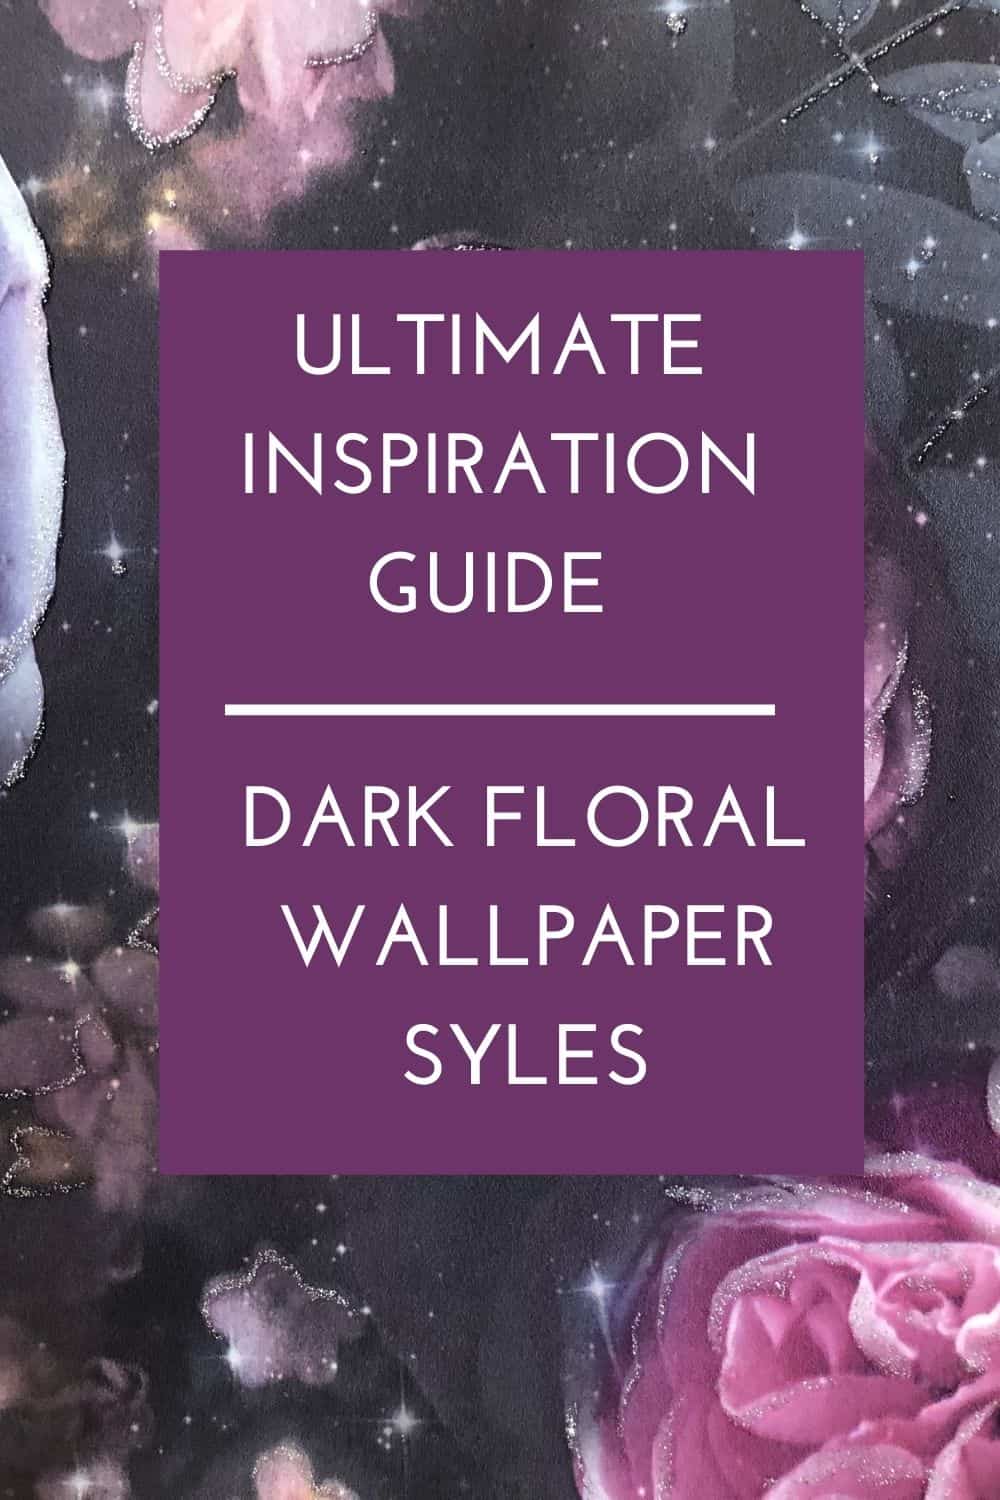 A Guide To Choosing the Best Floral Wallpaper